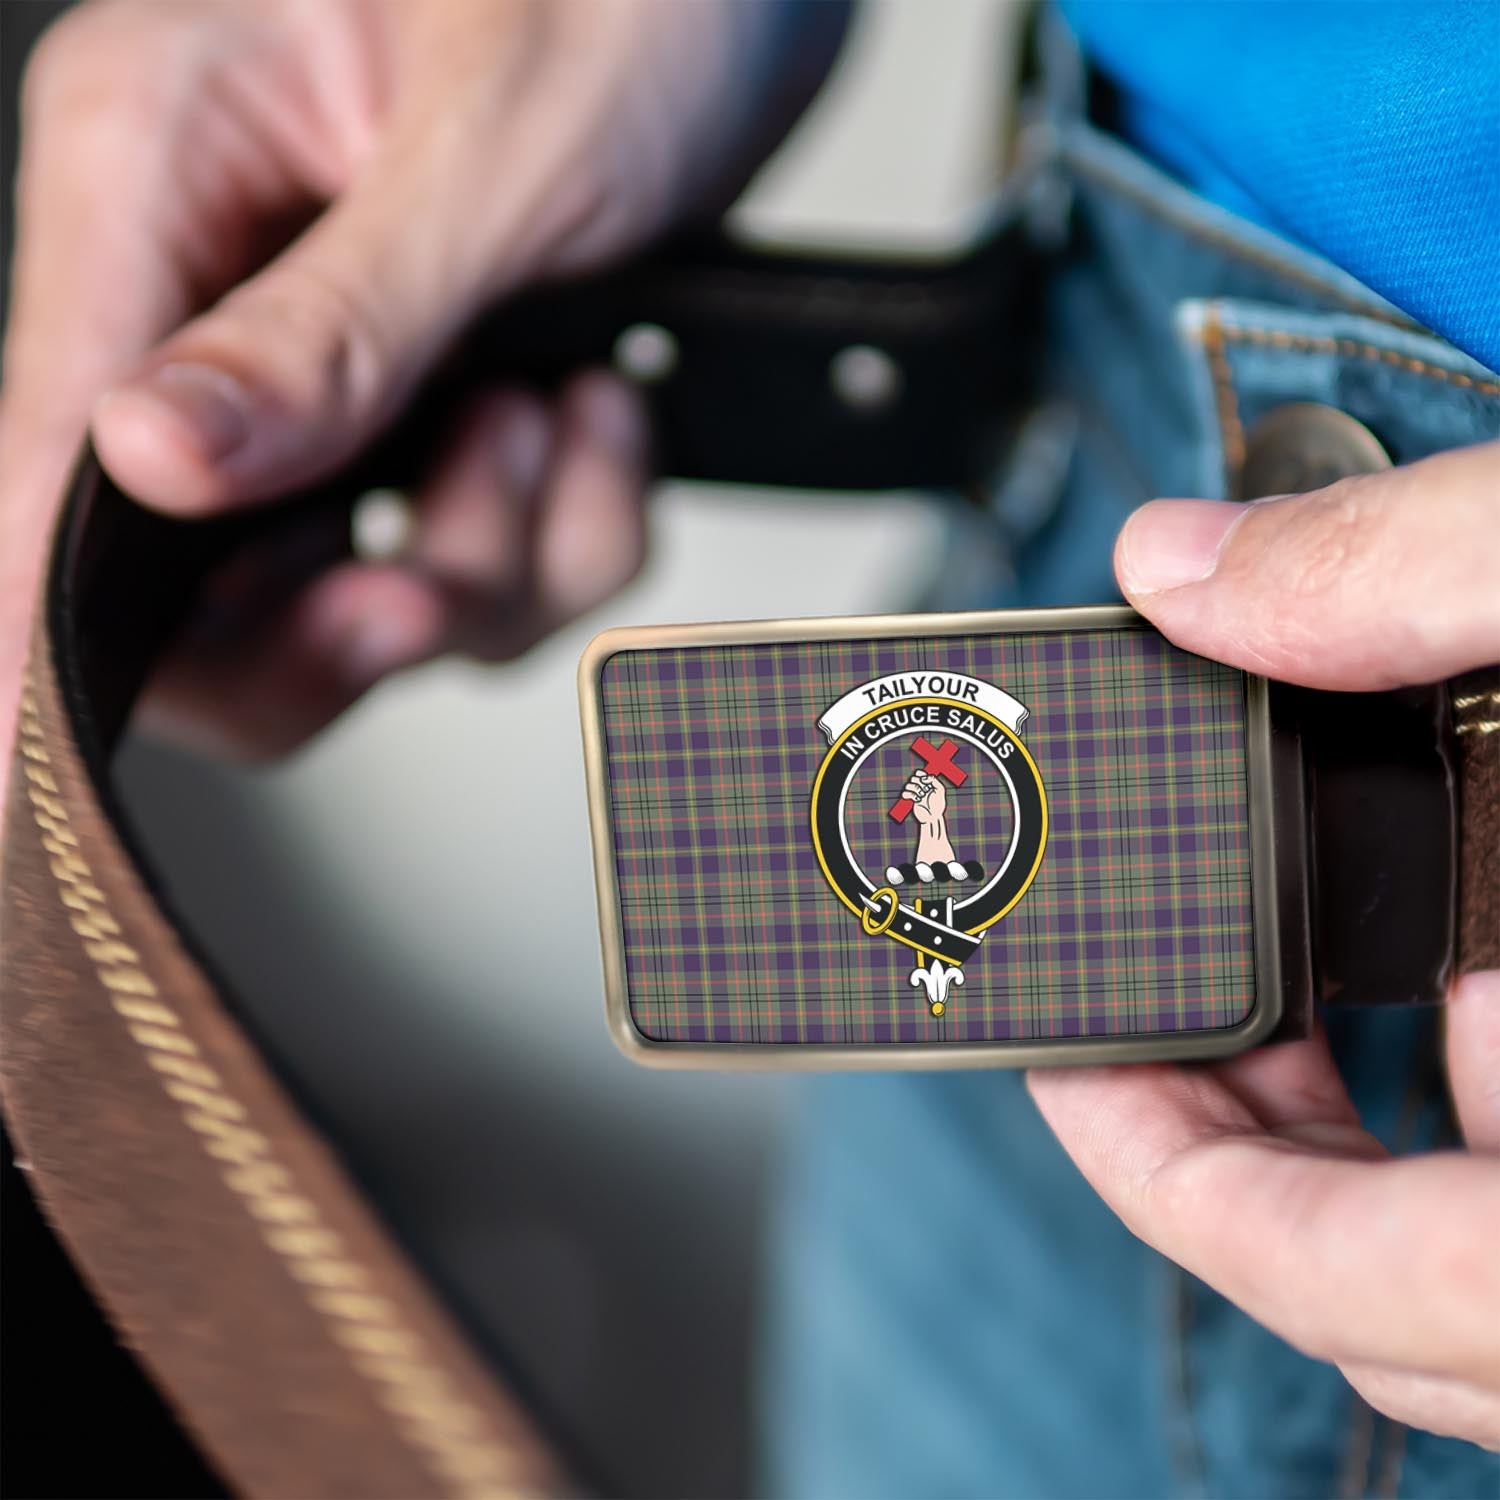 Taylor Weathered Tartan Belt Buckles with Family Crest - Tartanvibesclothing Shop